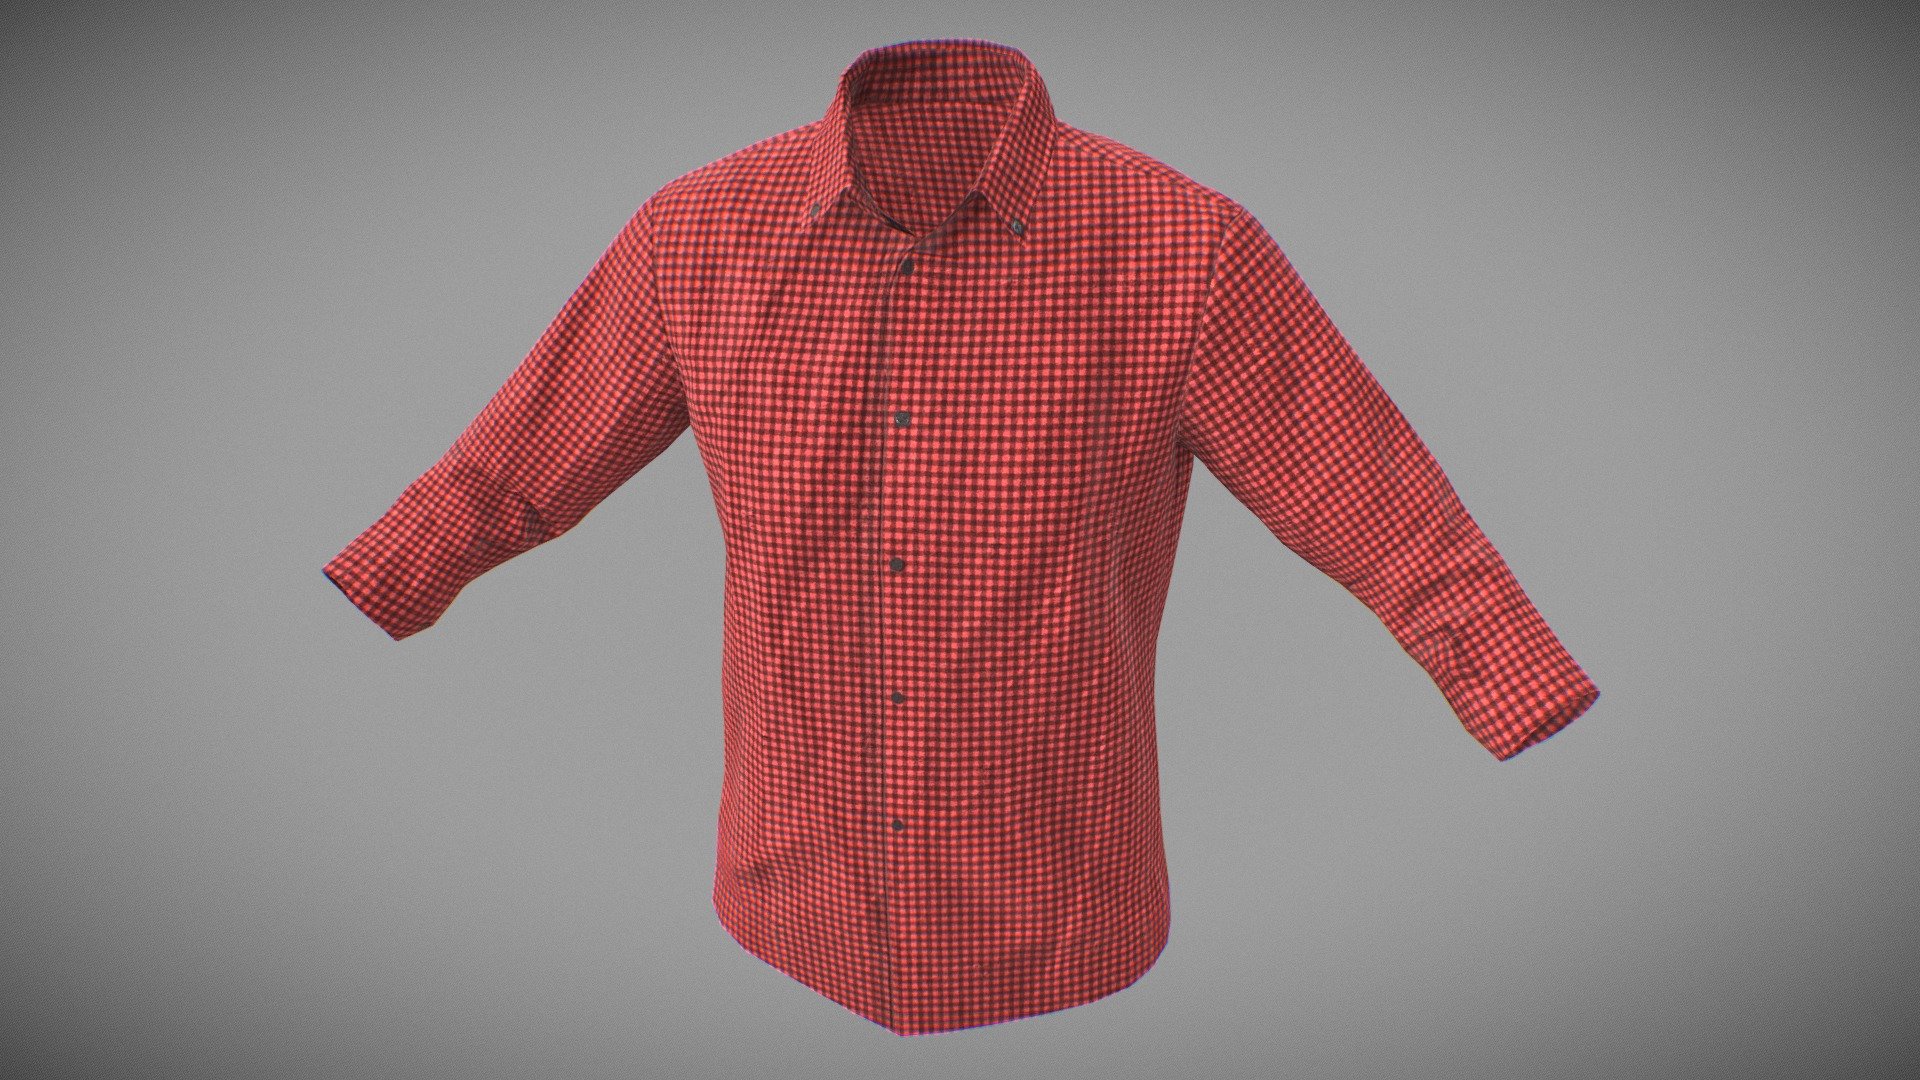 Shirt (low poly) baked and ready for production.
all textures included, use model inspector for more detail 3d model